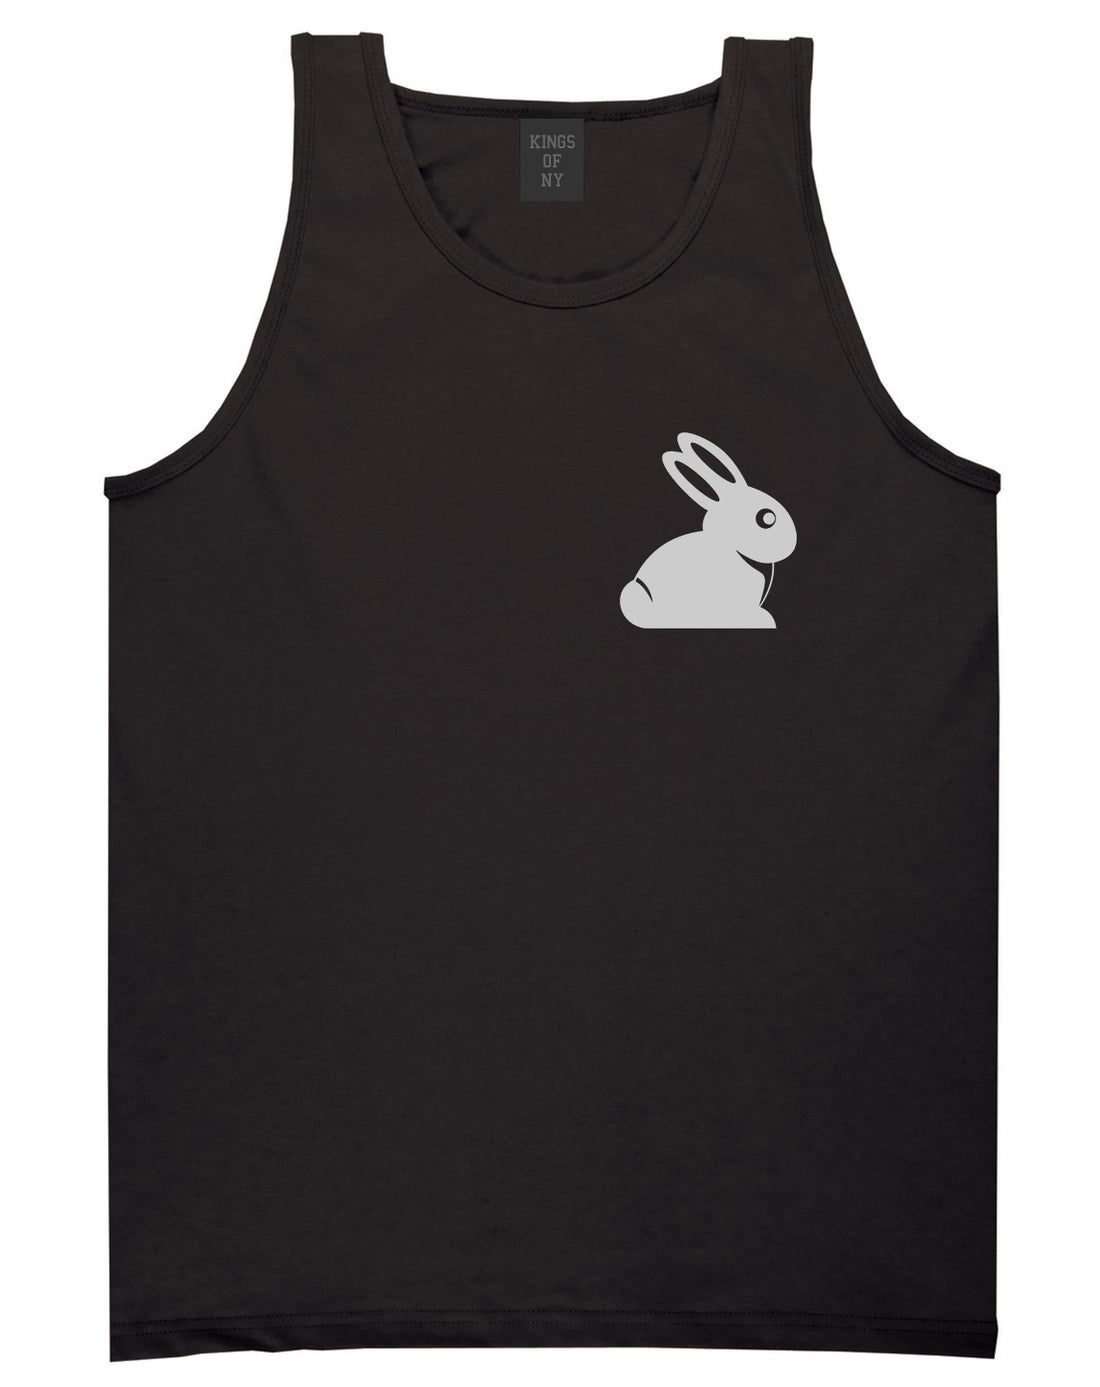 Easter_Bunny_Rabbit_Chest Mens Black Tank Top Shirt by Kings Of NY